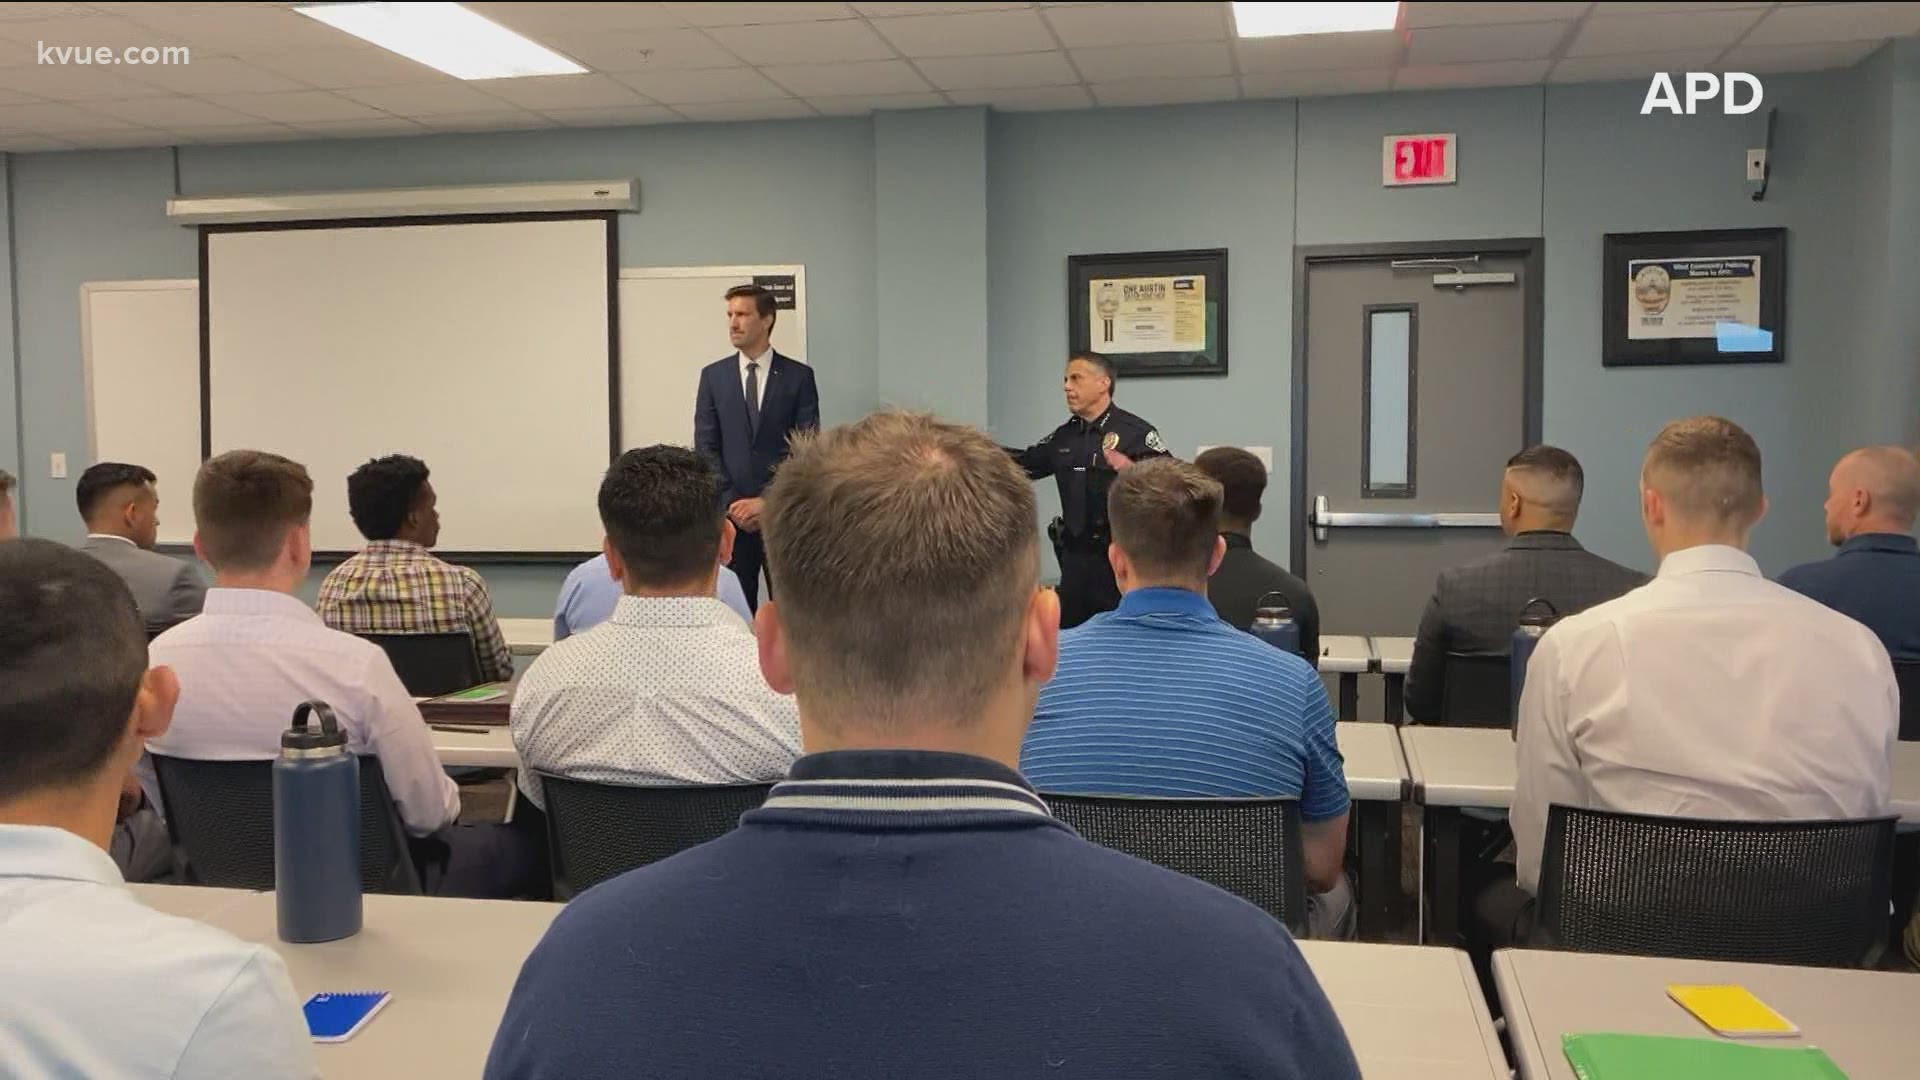 After being put on pause, the 144th Austin Police Department cadet class began on Monday.